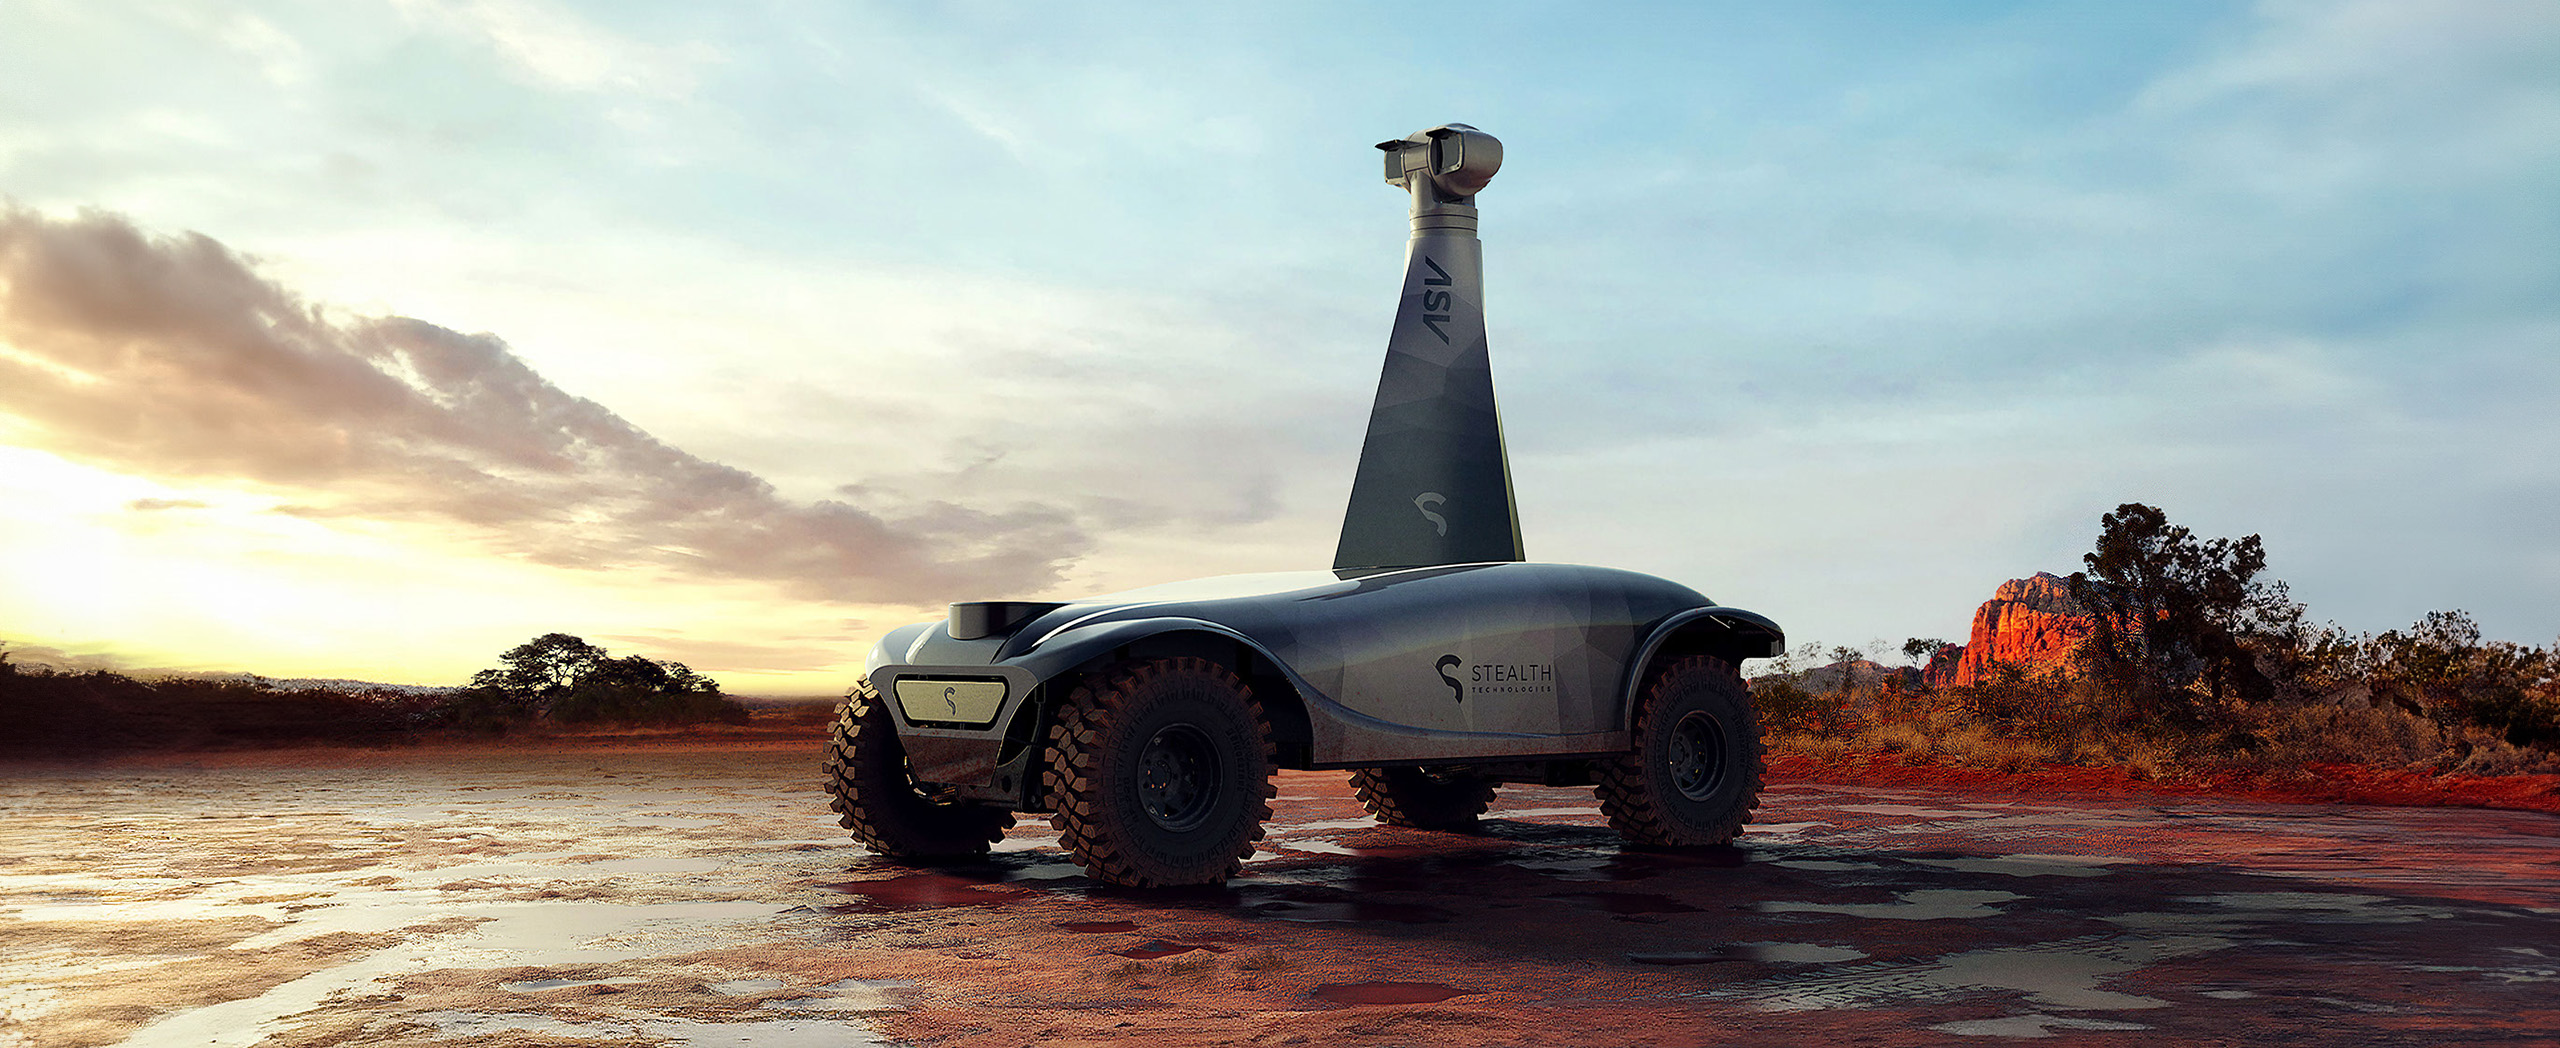 Stealth Technologies: Autonomous Security Vehicle (ASV) | Concept and Industrial Design for Defence Industry Applications Project Case Study